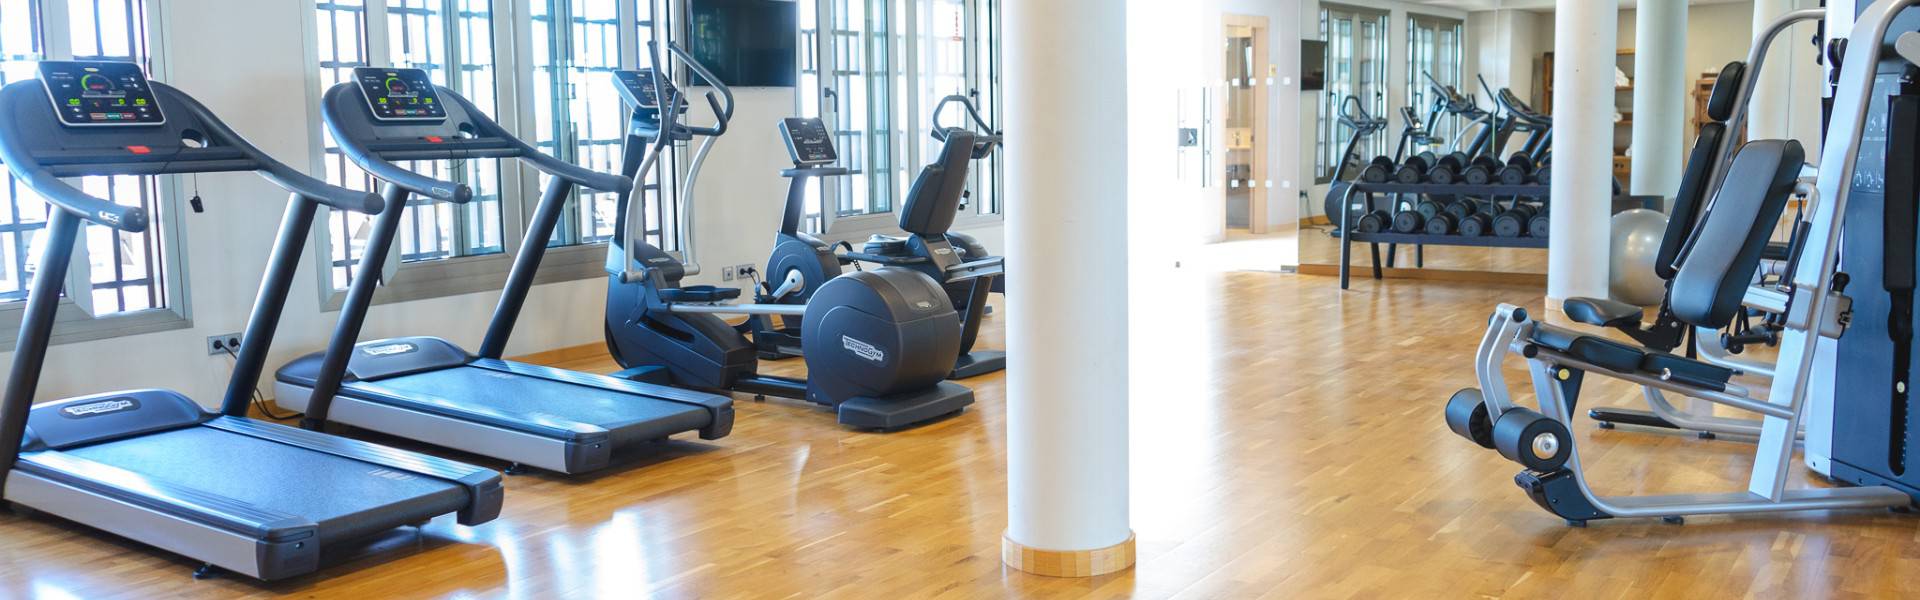 Gym and personal trainer service Abama Hotels